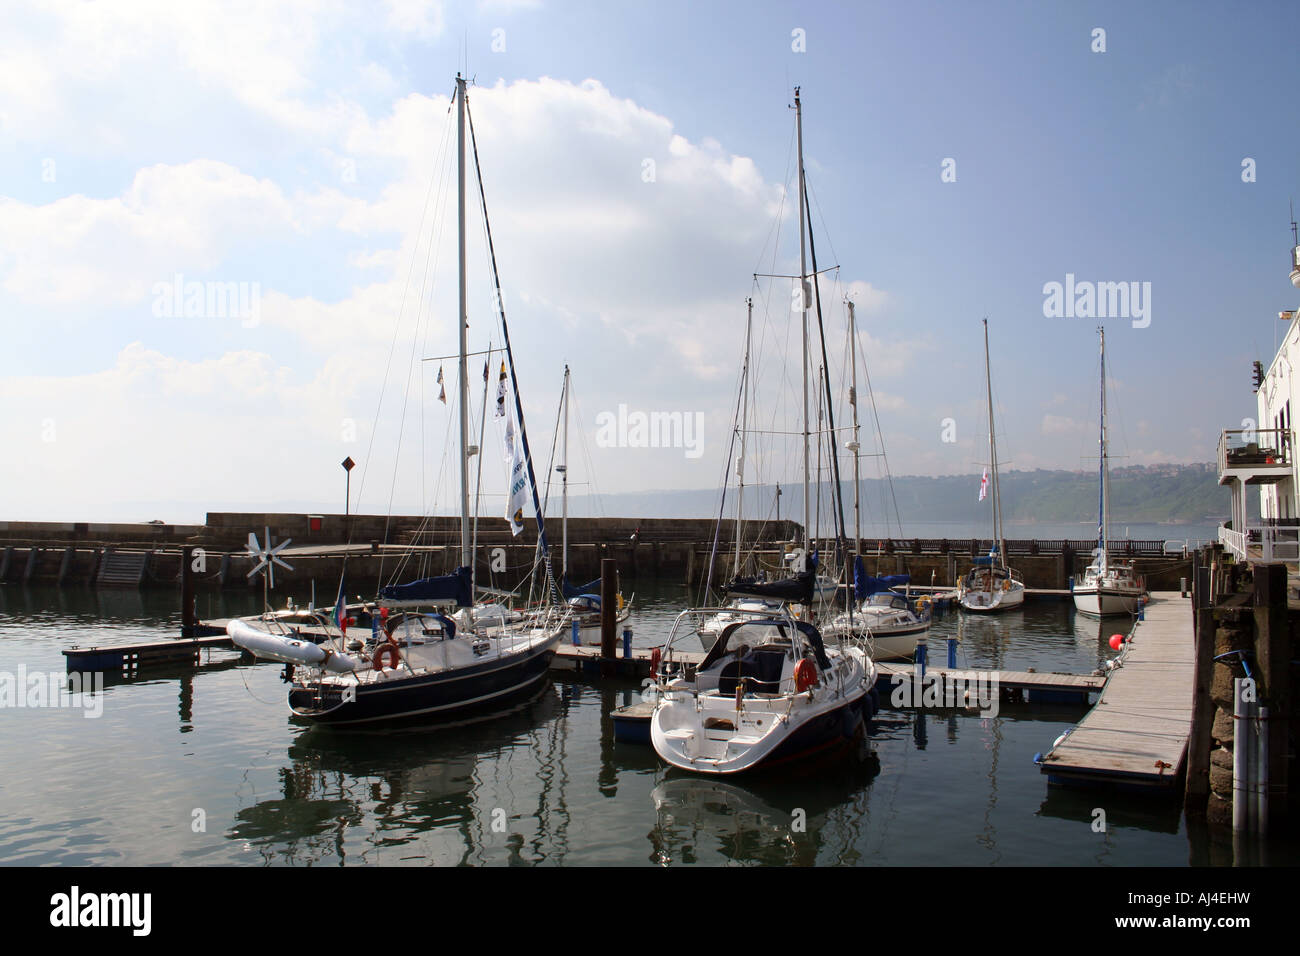 Scenic view of yachts moored in Scarborough harbor marina, North Yorkshire, England. Stock Photo